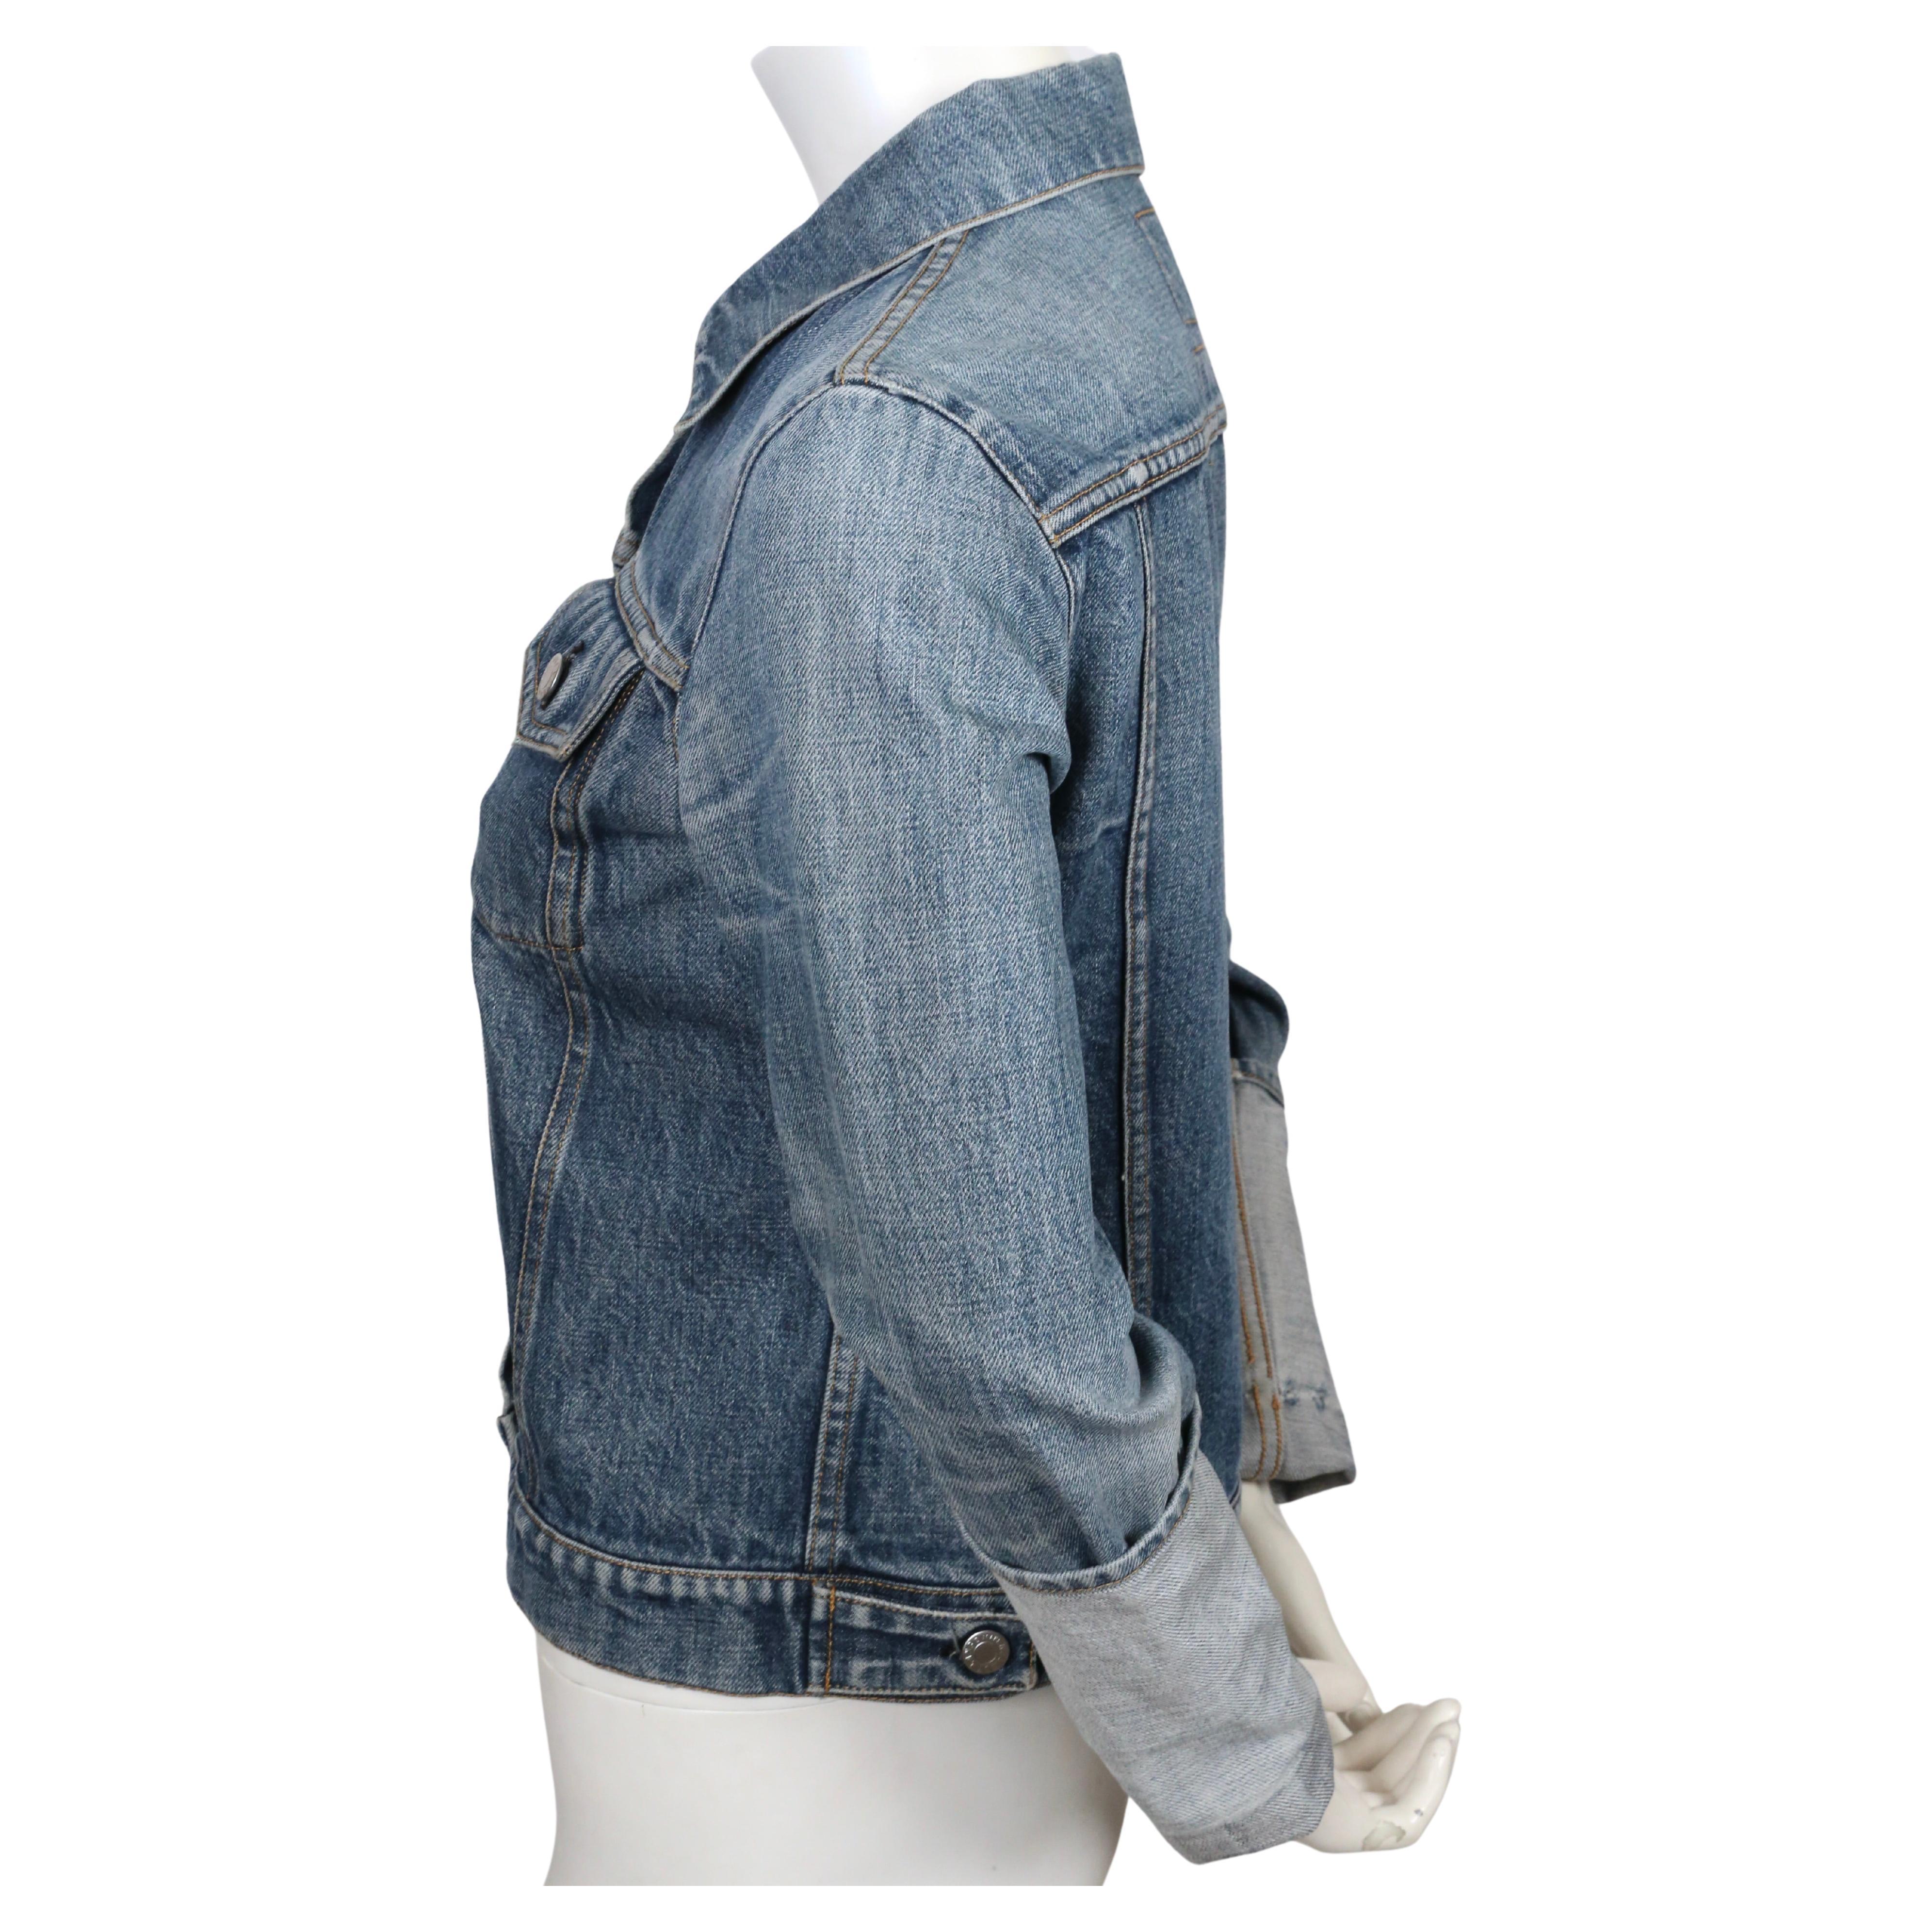 Gray 1990's HELMUT LANG distressed denim jacket with extra long turn up cuffs